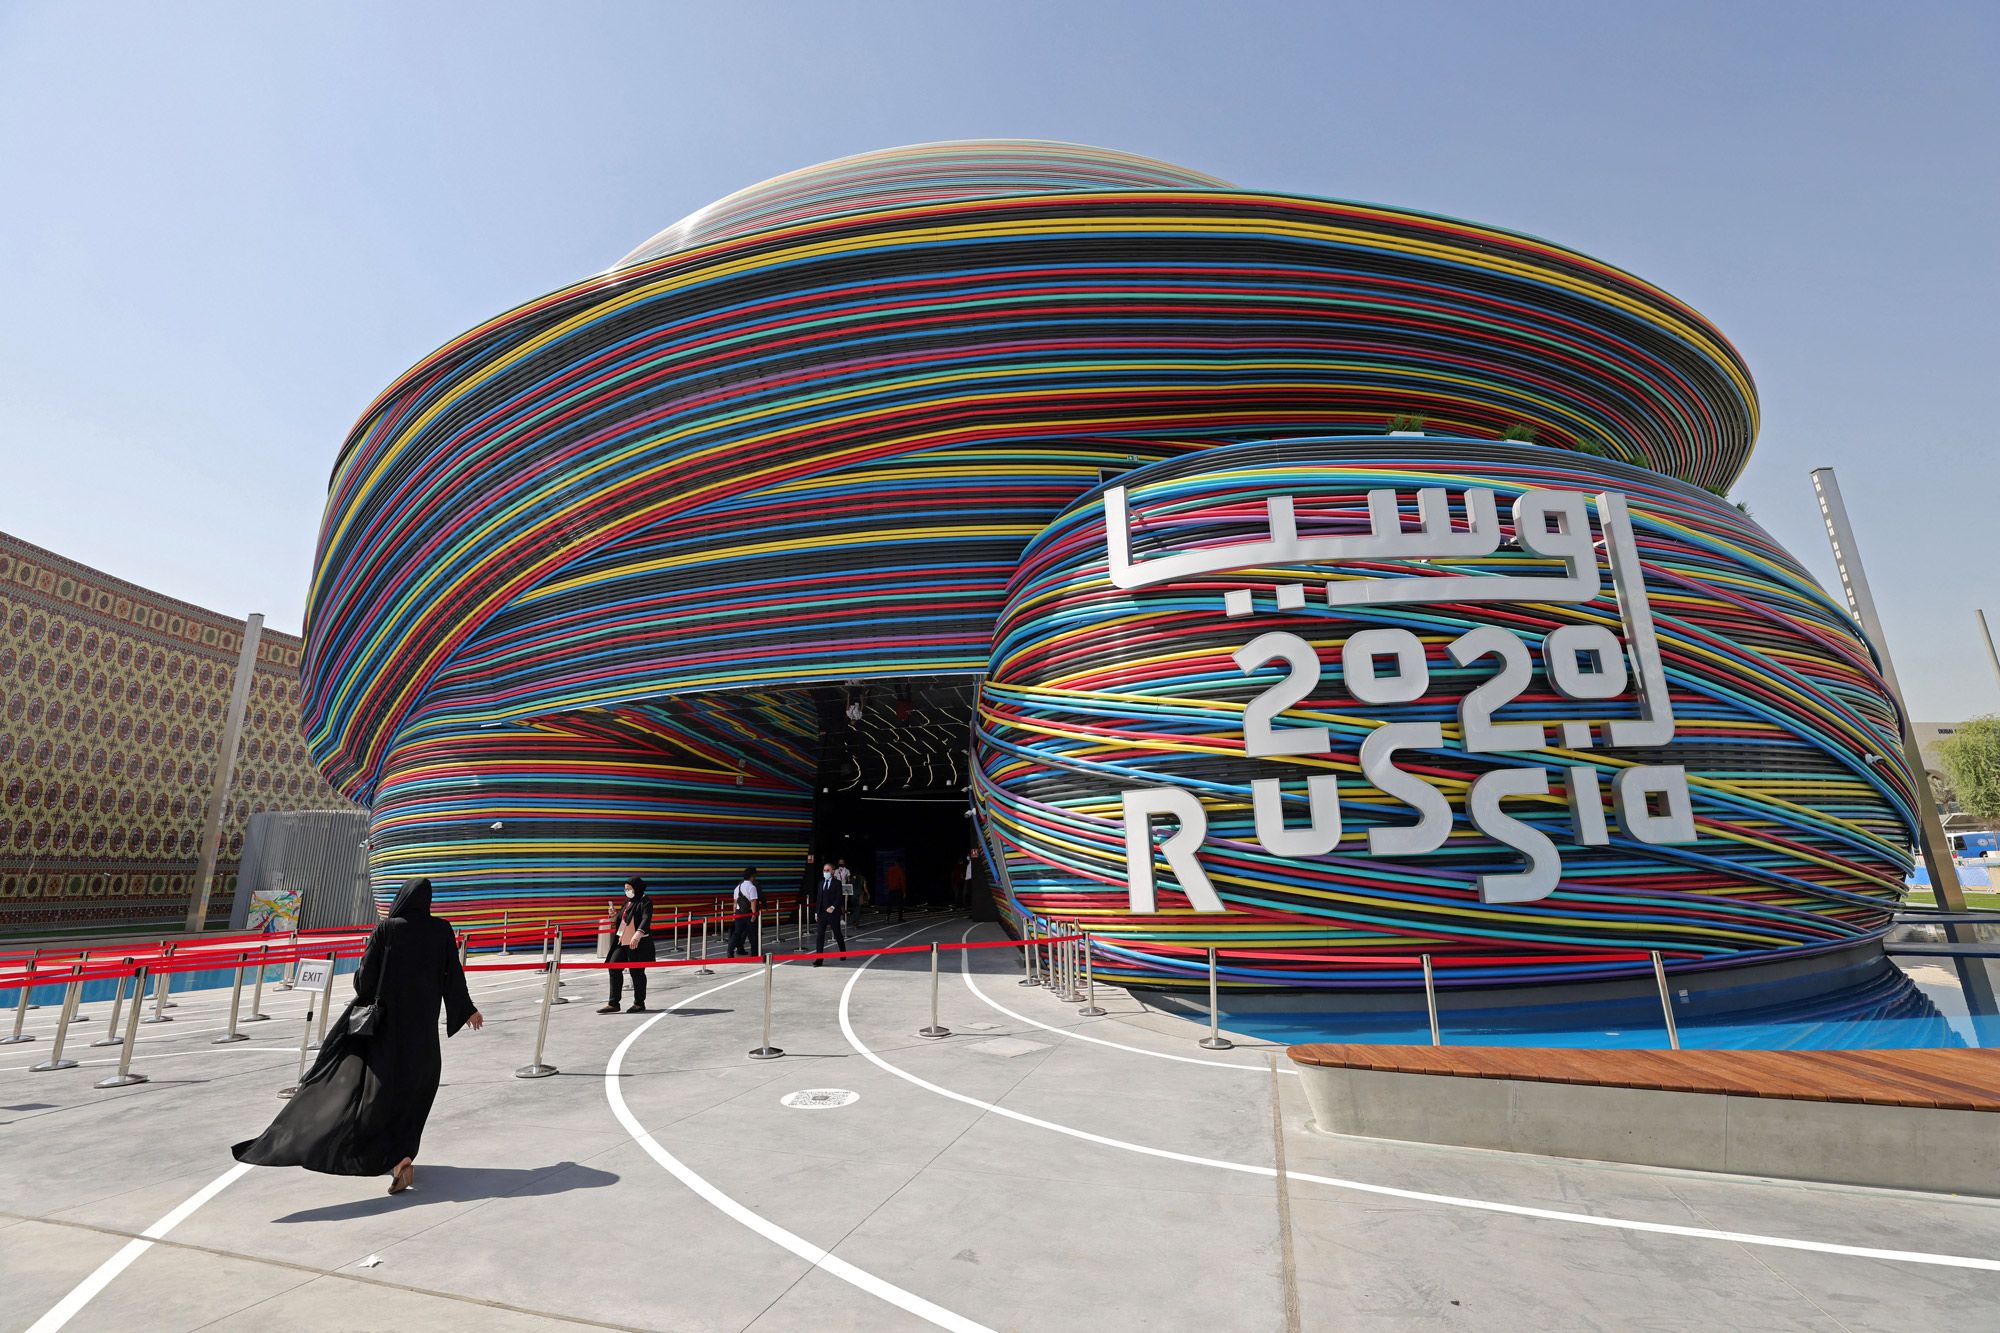 Expo 2020 Dubai pavilions will showcase global innovations in